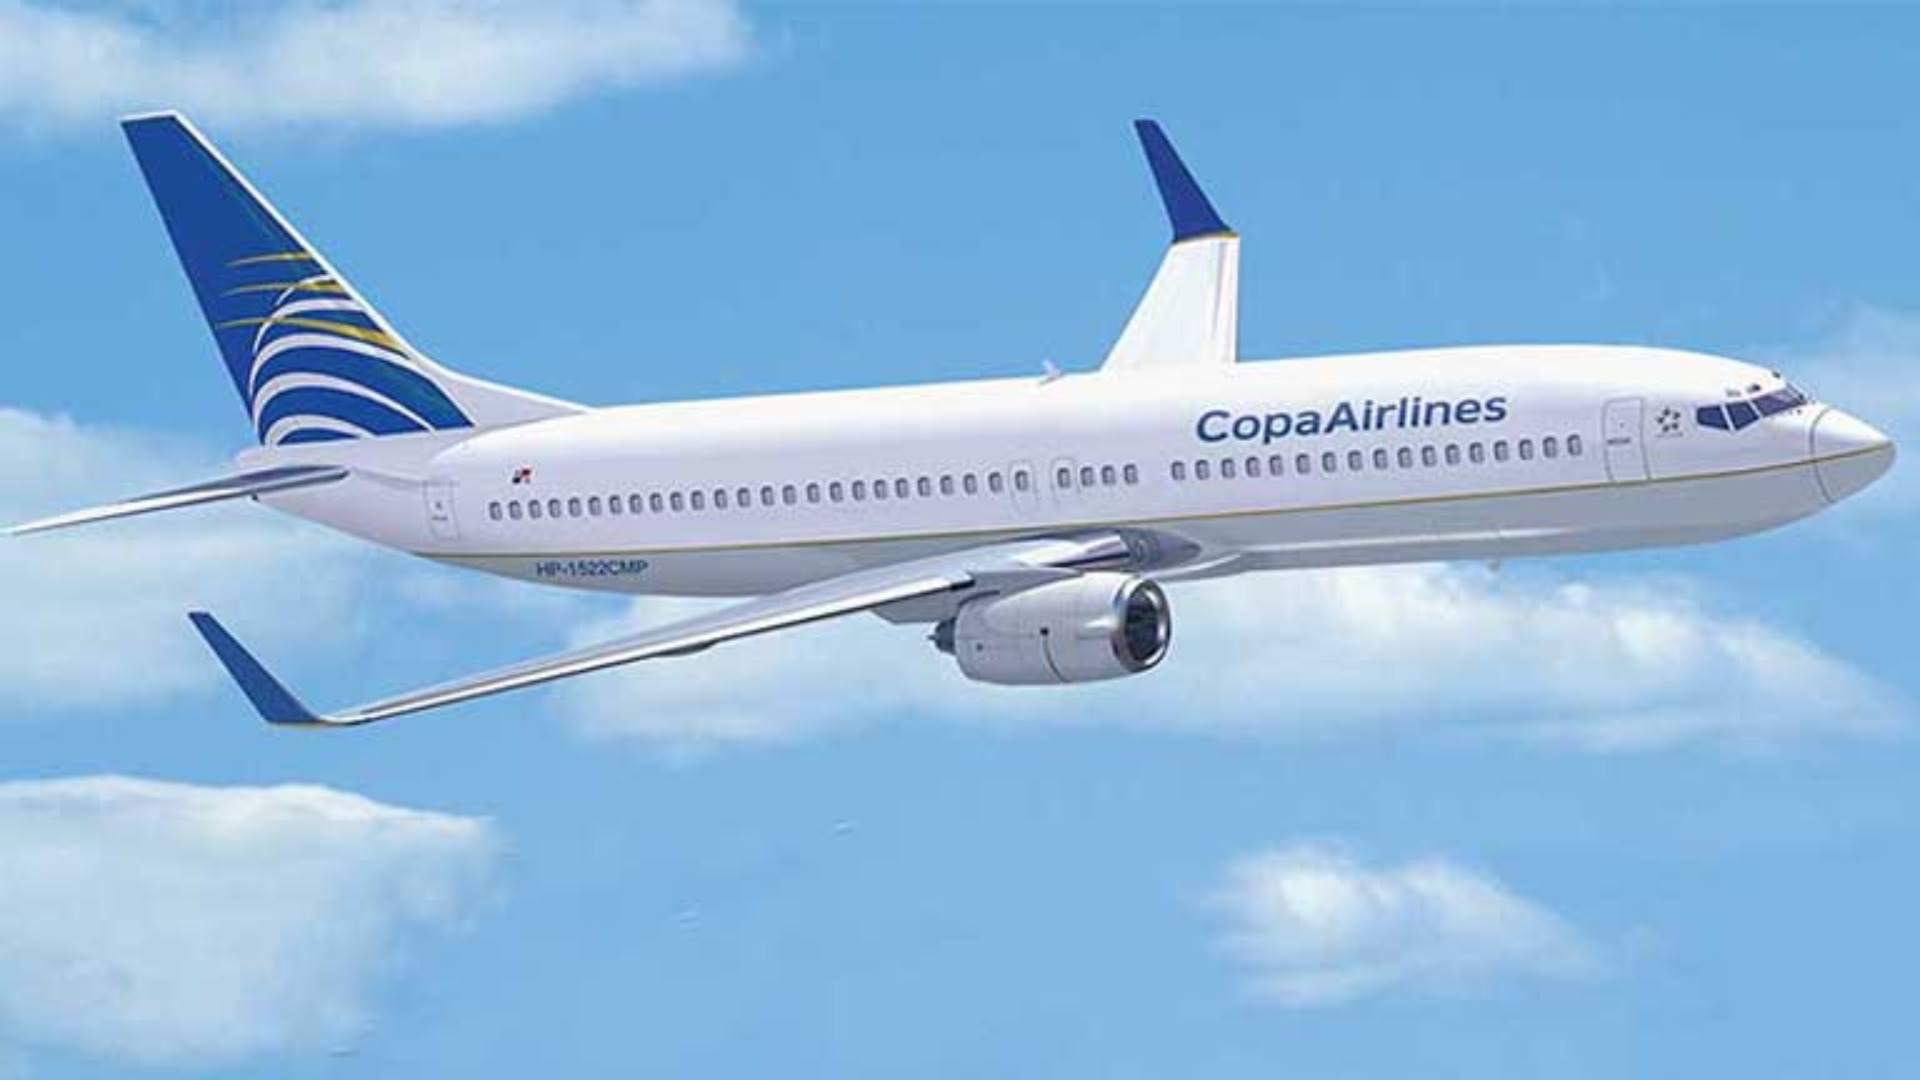 Copa Airlines will increase its flights to Punta Cana